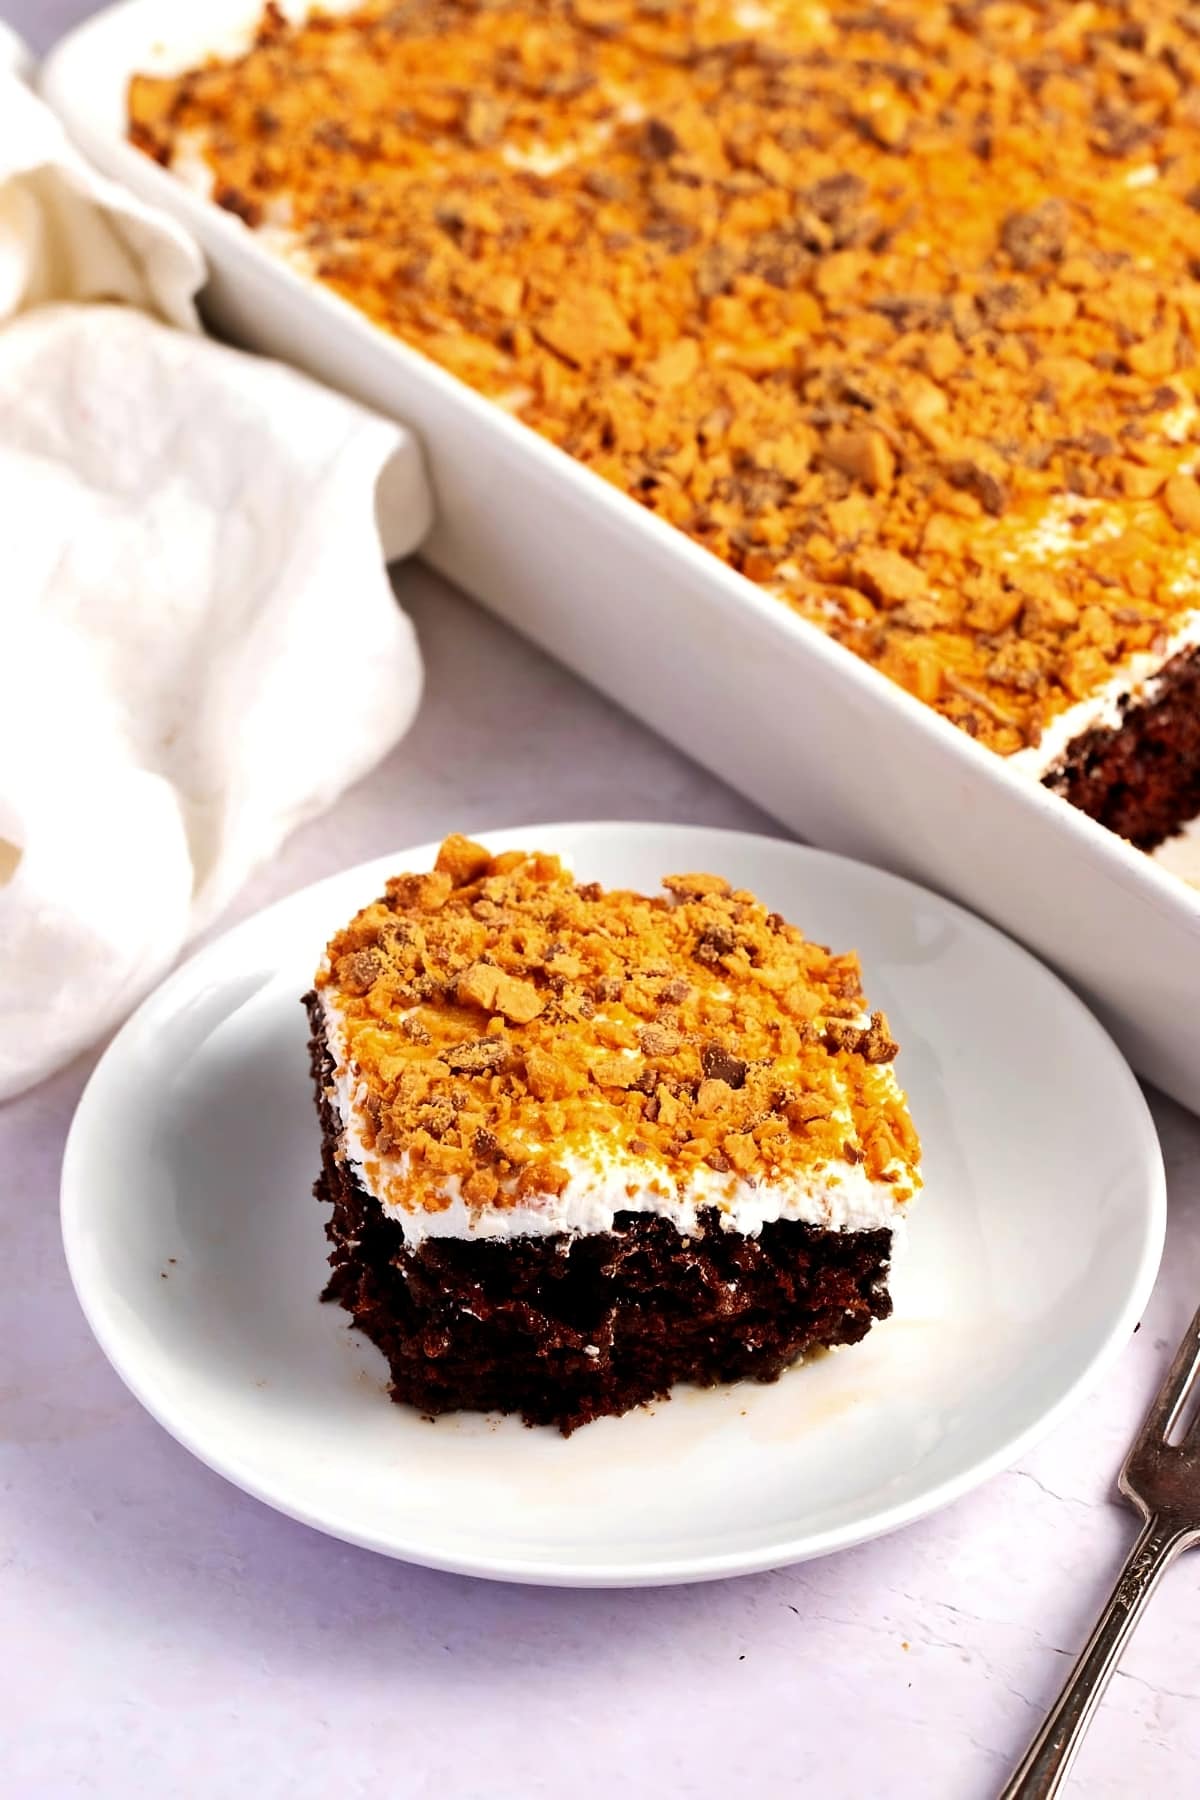 Sliced Homemade Holy Cow Cake with Crunchy Butterfinger Bar